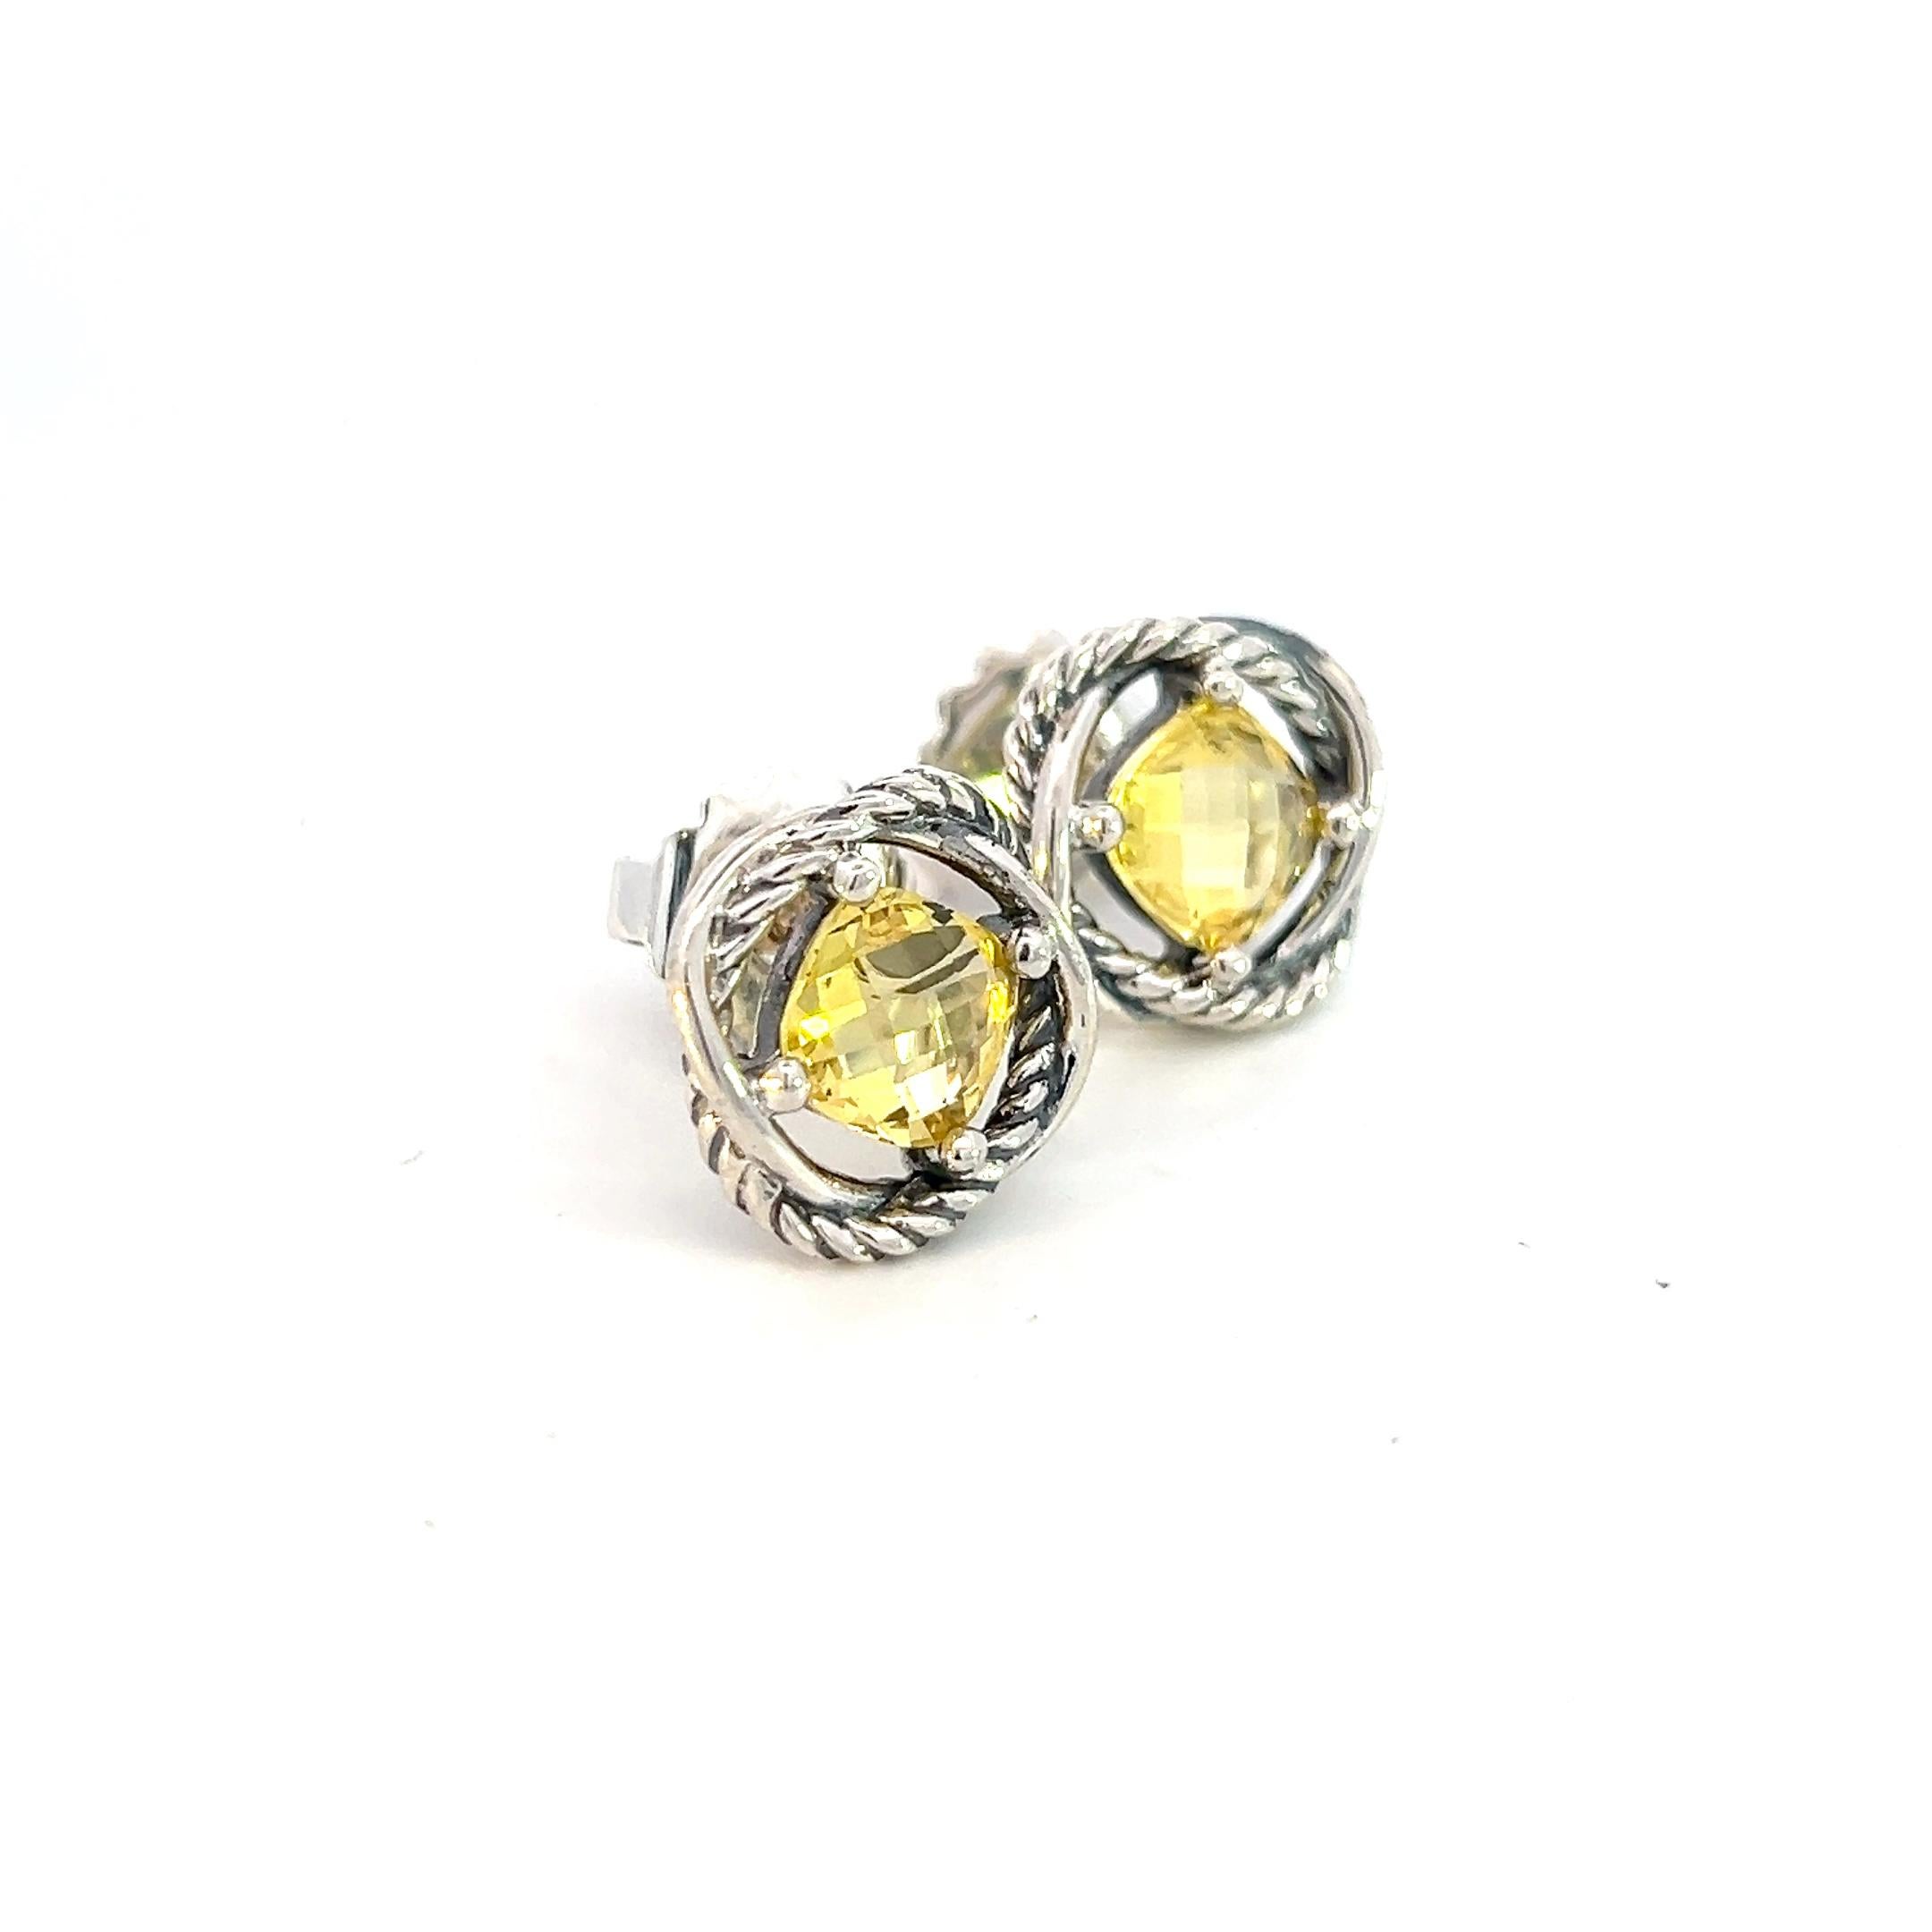 Authentic David Yurman Estate Citrine Infinity Earrings 14k Gold Silver DY428

Retail: $360.00

These elegant Authentic David Yurman earrings are made of sterling silver.

TRUSTED SELLER SINCE 2002
PLEASE SEE OUR HUNDREDS OF POSITIVE FEEDBACKS FROM